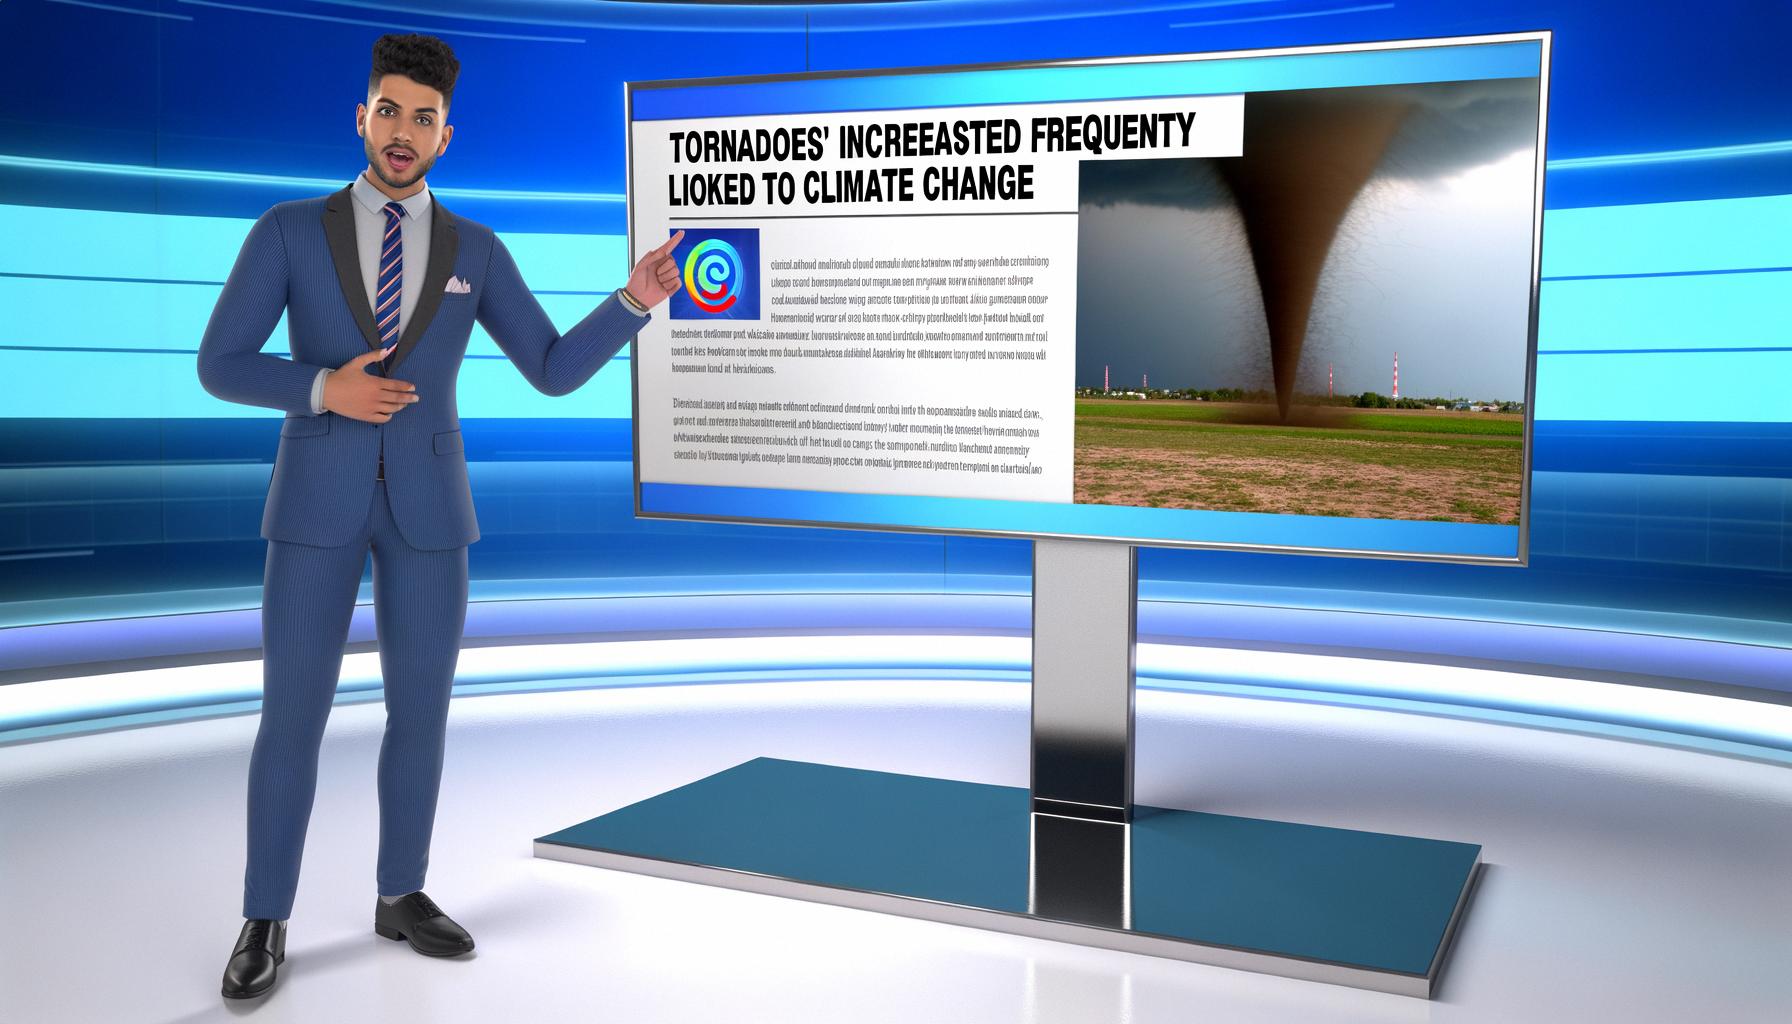 Tornado outbreaks and severe storms linked to climate change's effects.